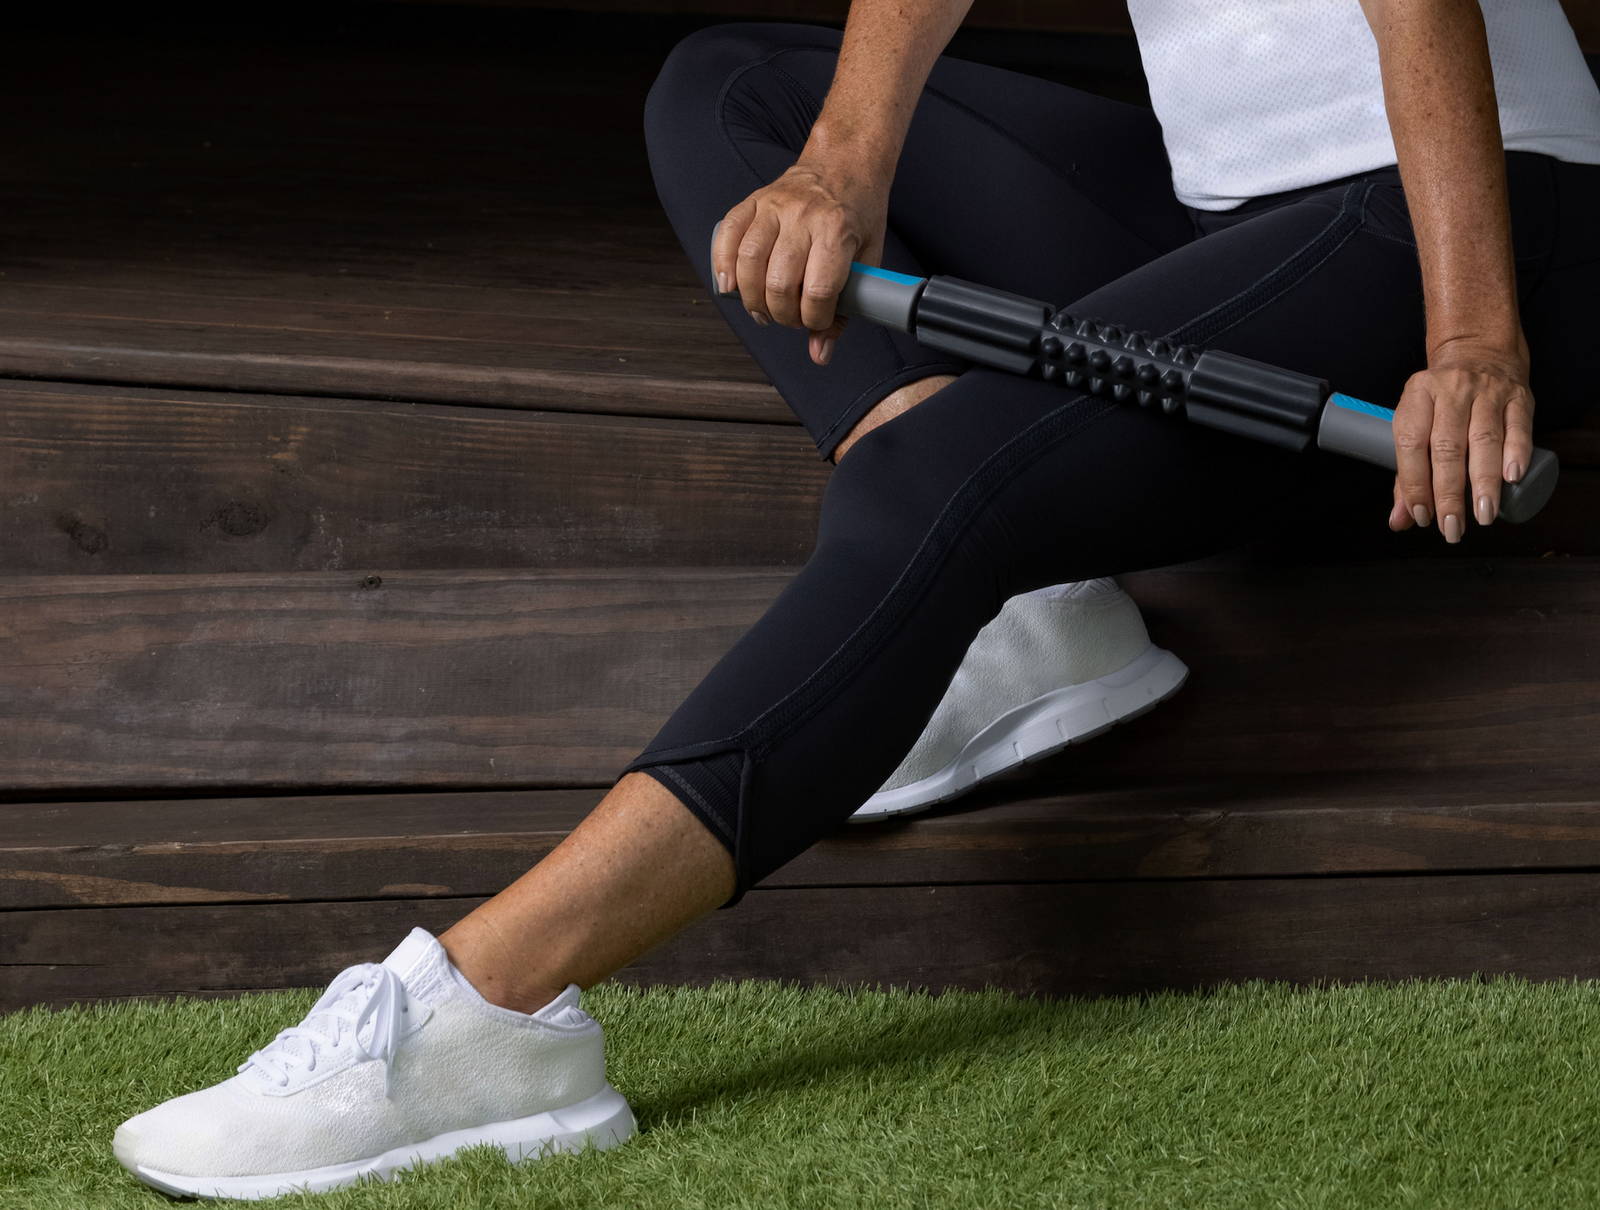 4 Ways to Use the Massage Roller Other Than Just Rolling Out Your Thighs